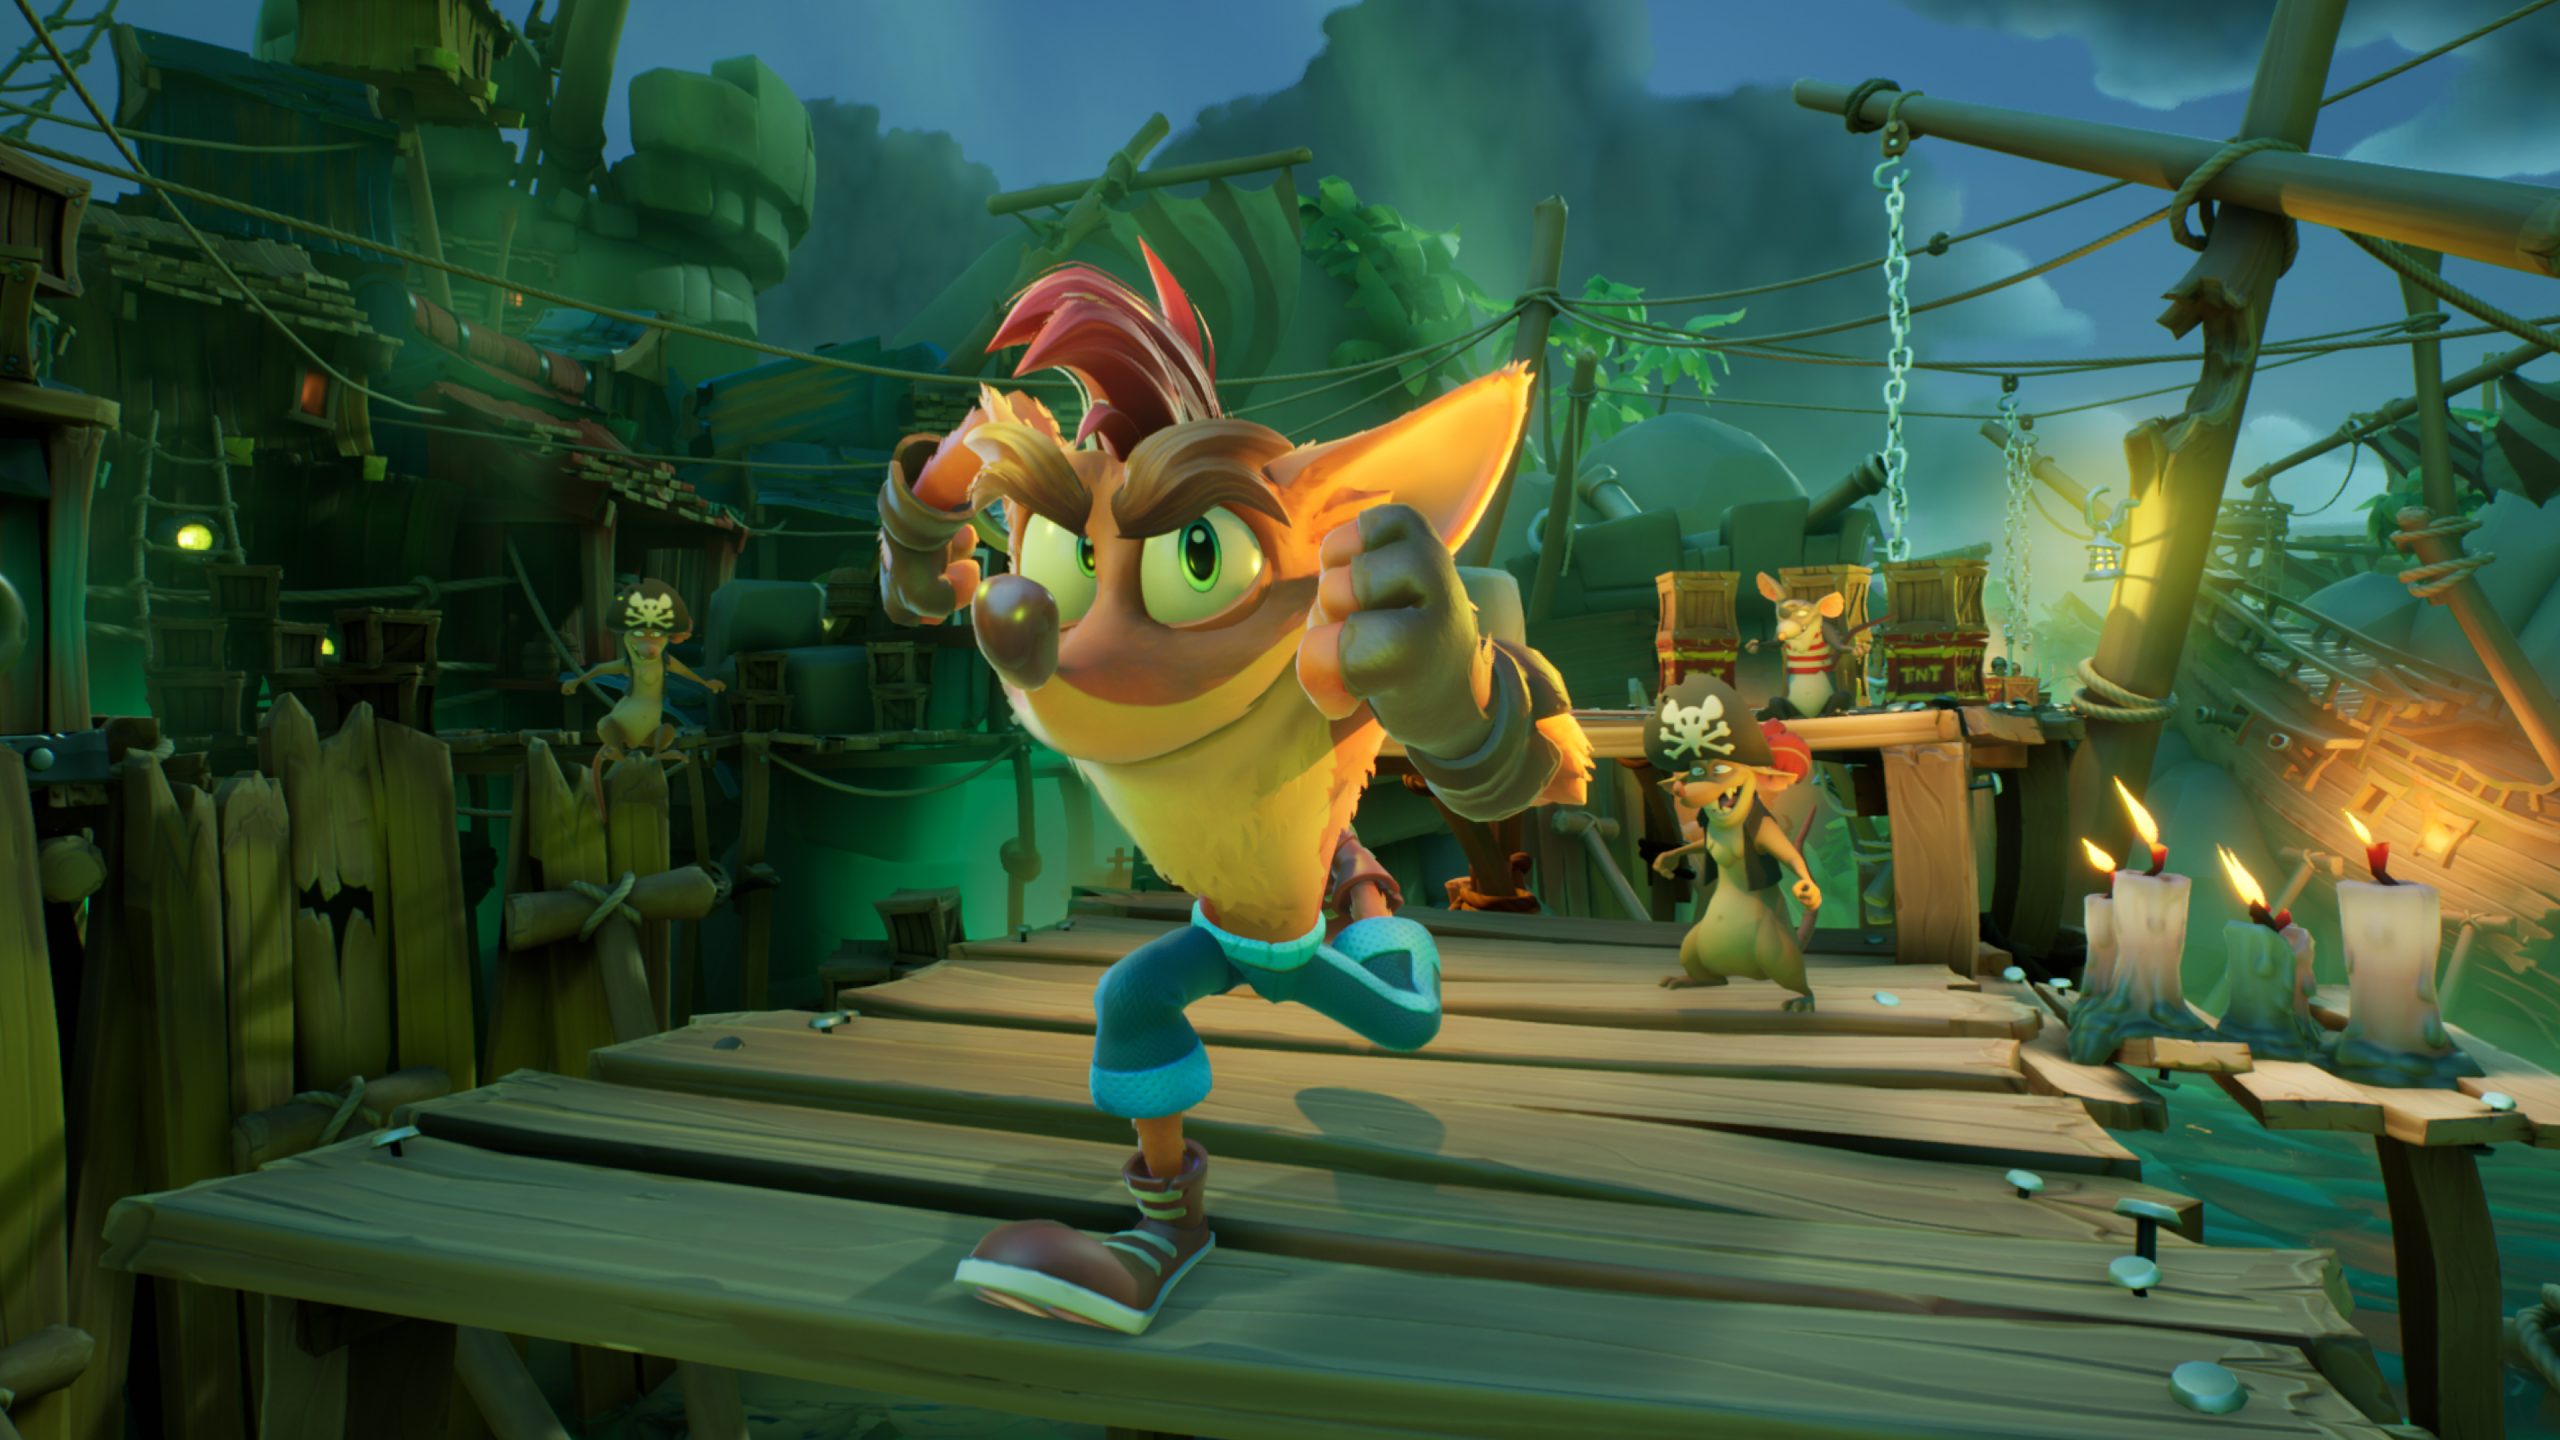 Crash Bandicoot 4: It’s About Time coming to PS5, Xbox Series, and Switch next month